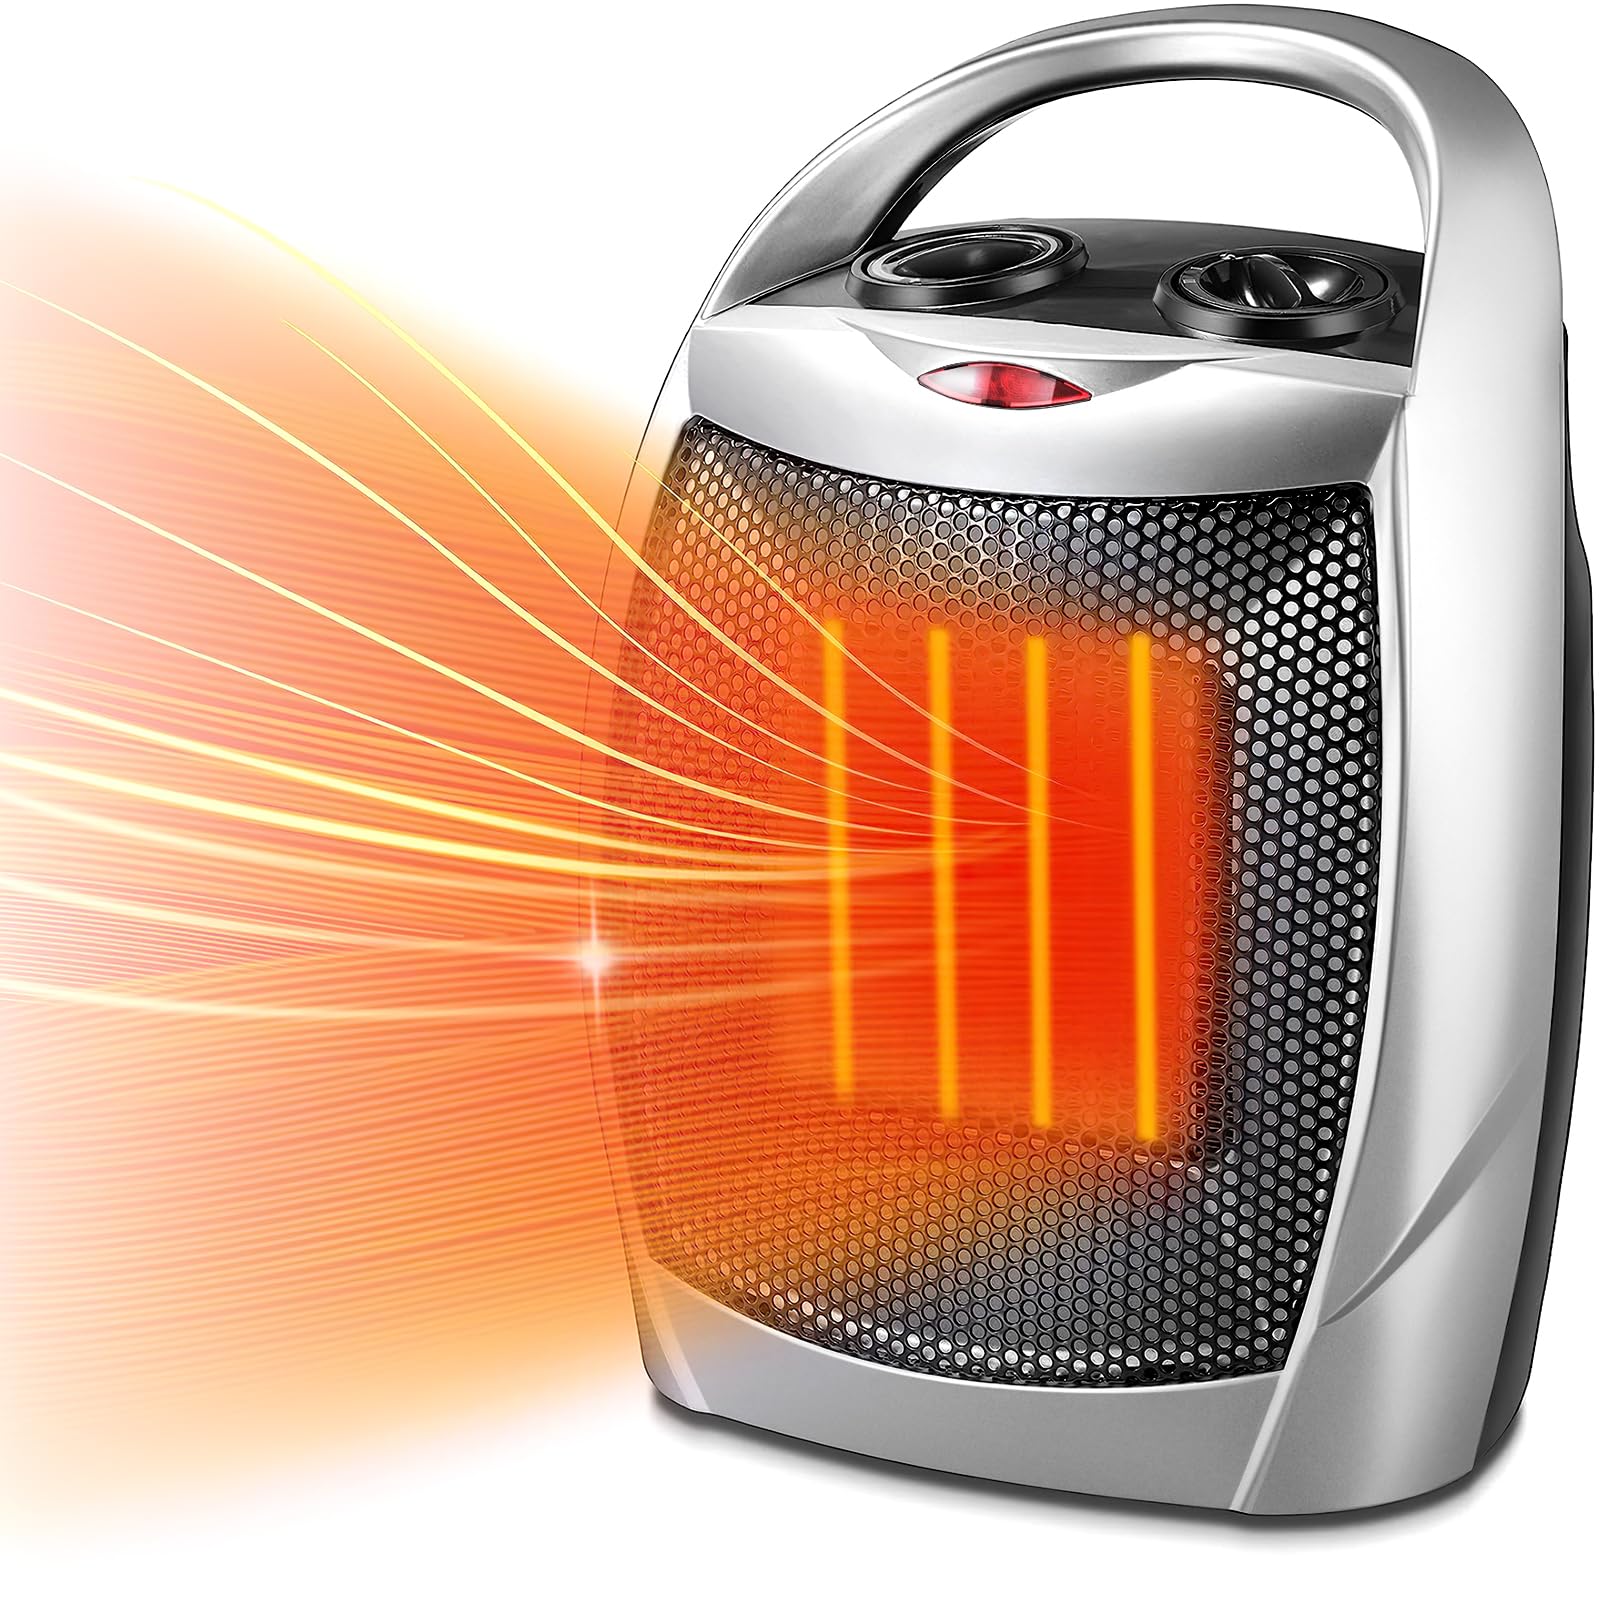 R.W.FLAME Portable Space Heater with Thermostat, Electric Space Heater,3 Modes